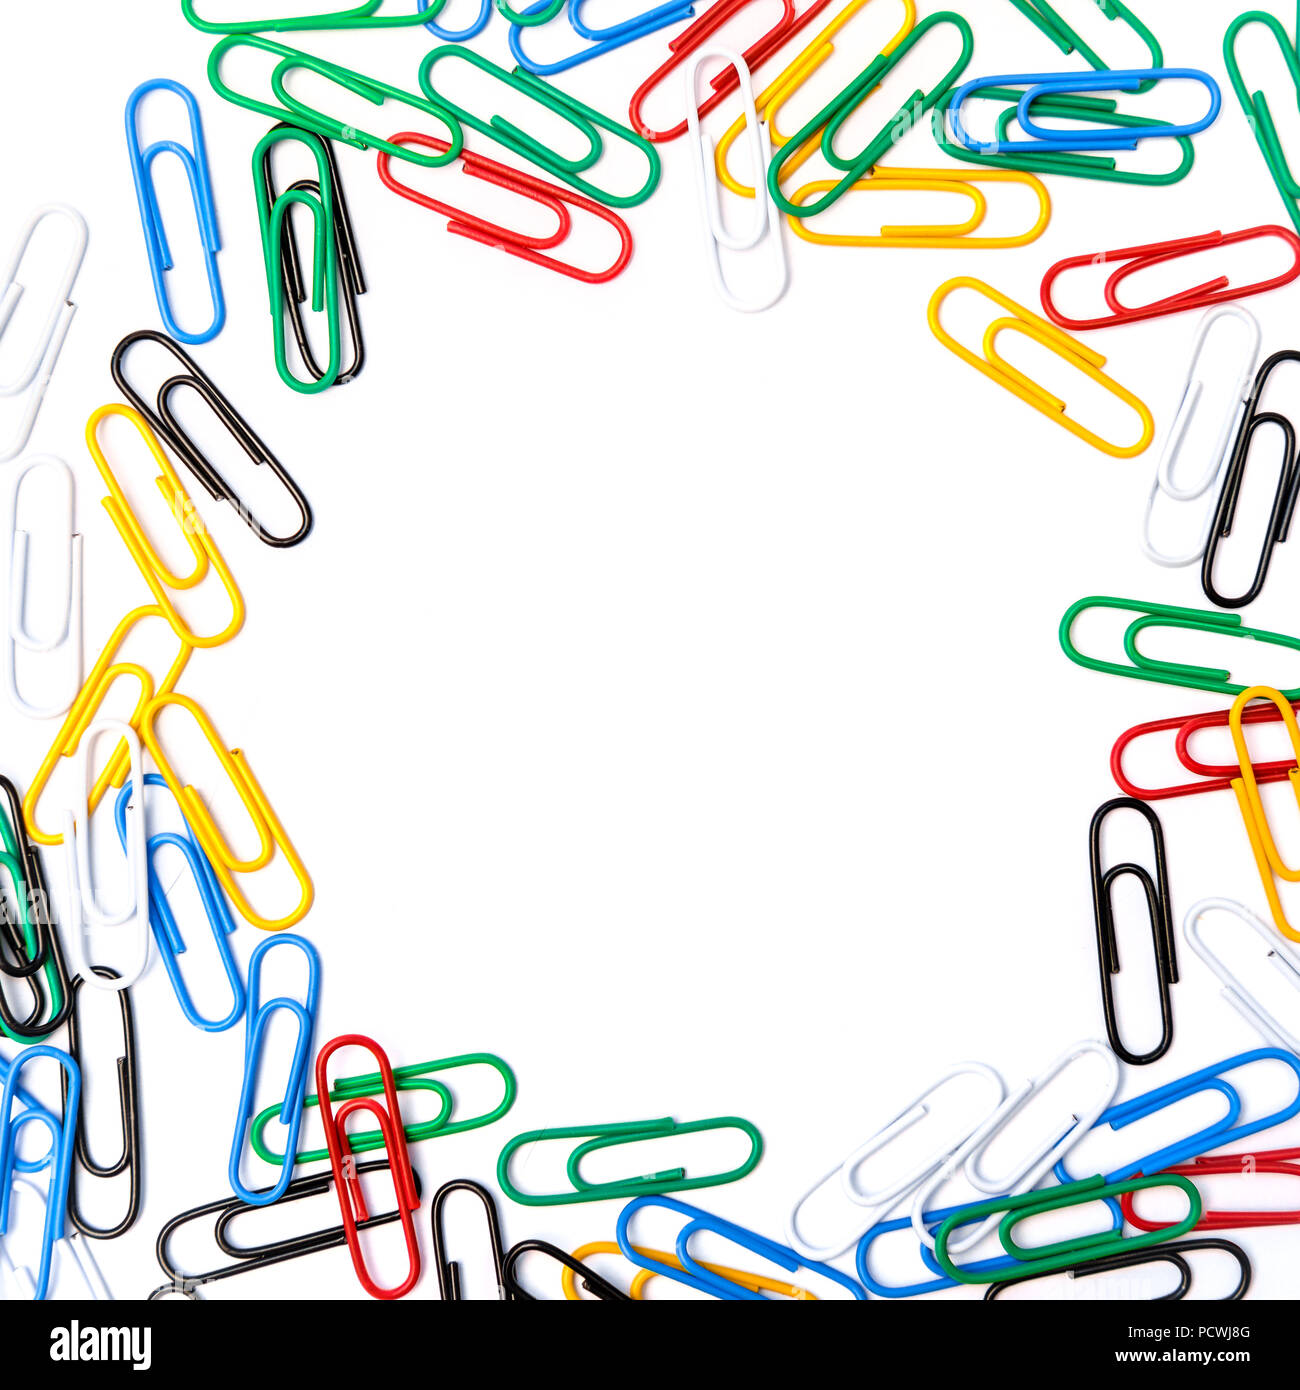 Colorful paper clips square frame Stock Photo